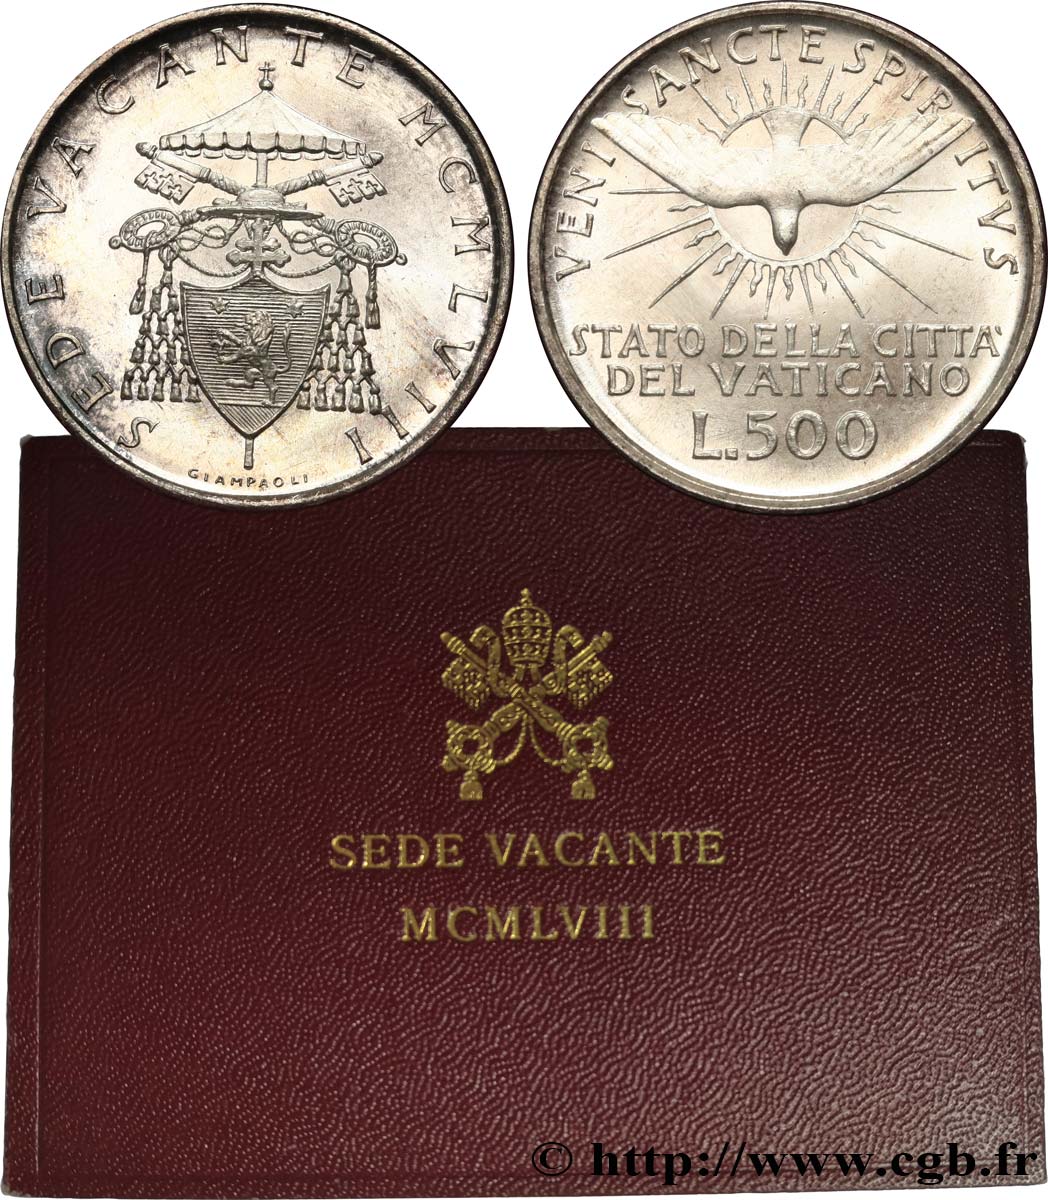 VATICAN AND PAPAL STATES 500 Lire Sede Vacante Colombe et armes du cardinal Benedetto Aloisi Masella 1958 Rome - R MS 